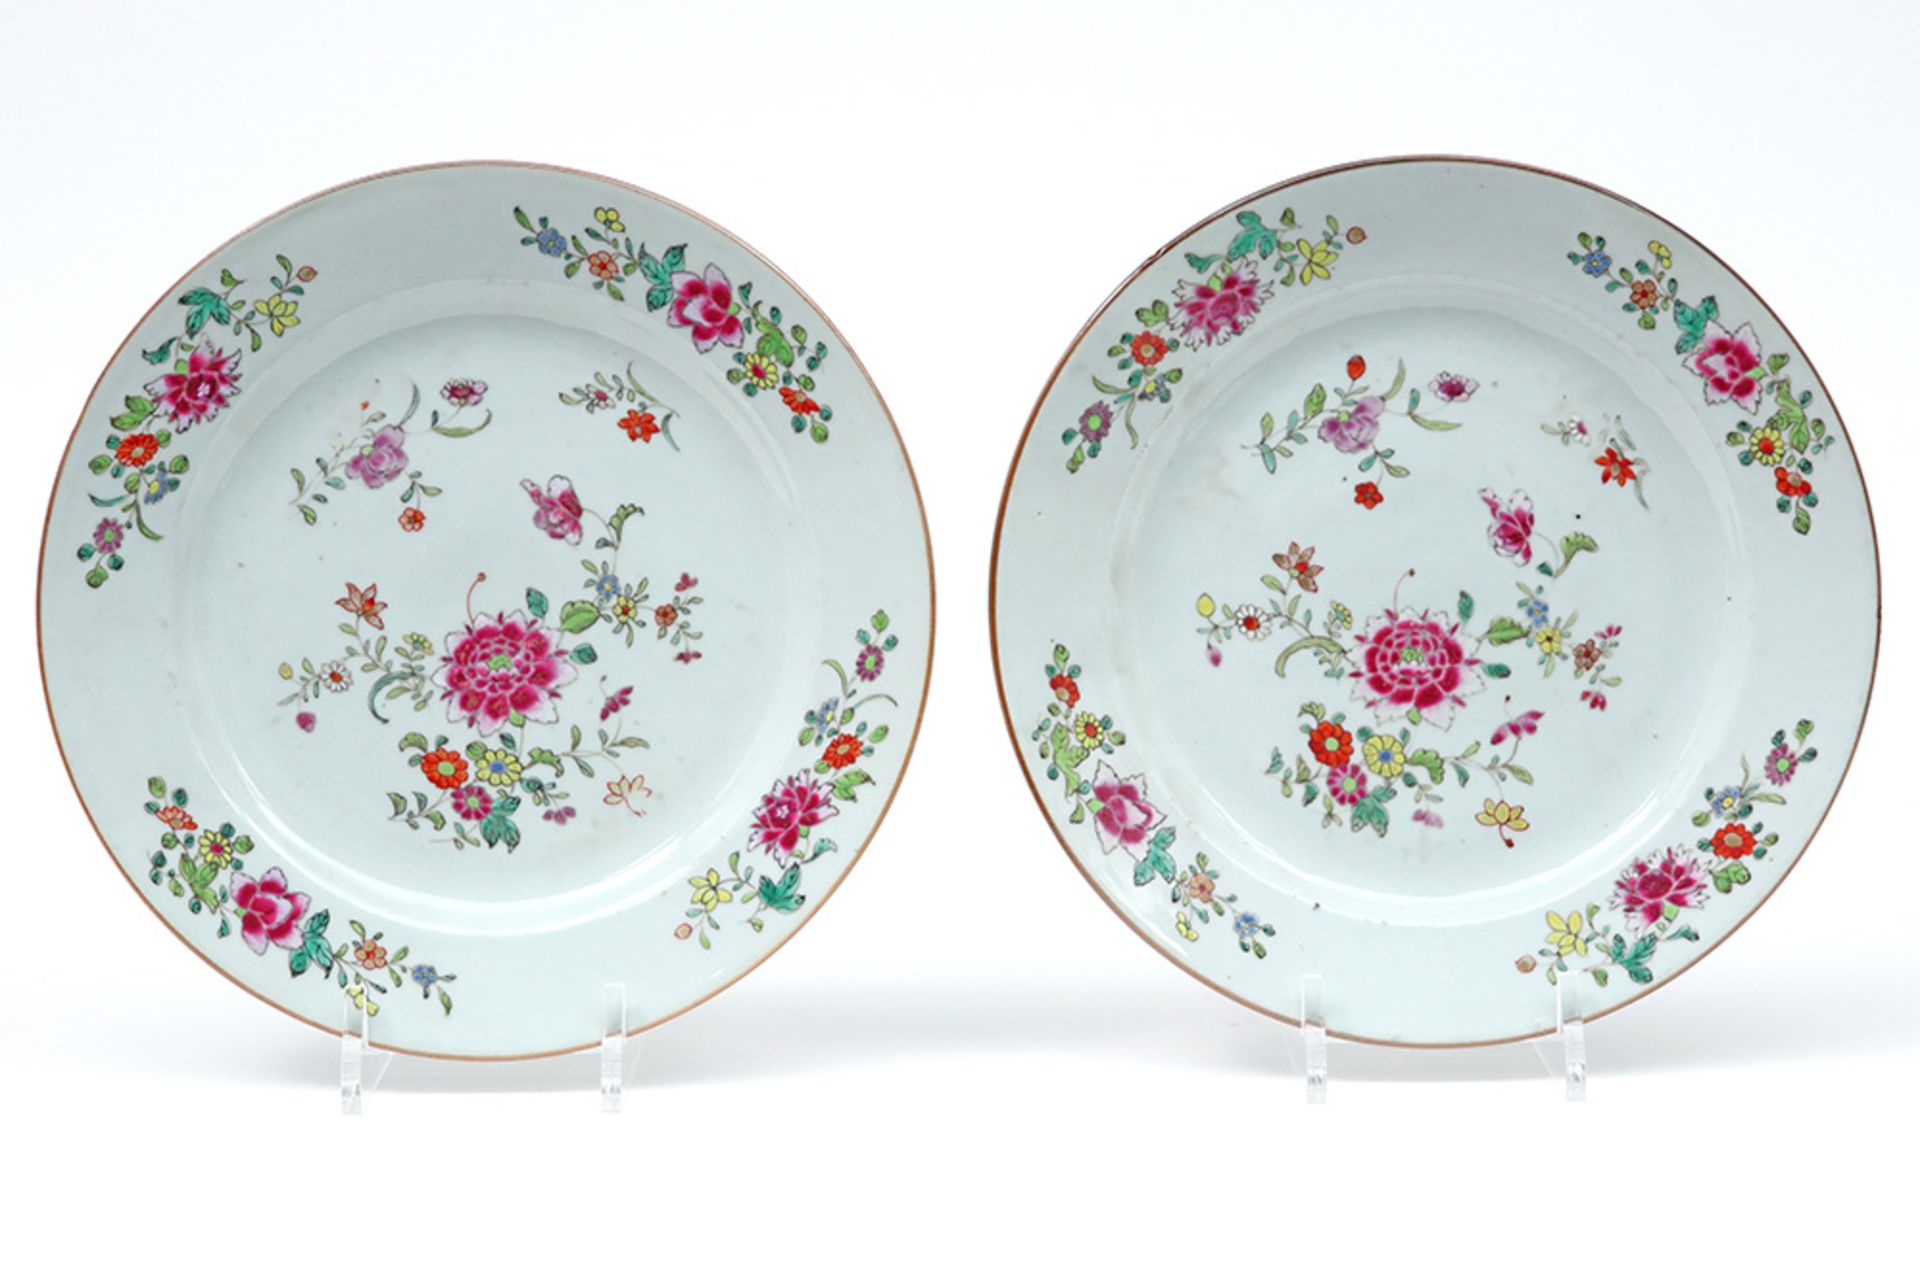 pair of 18th Cent. Chinese plates in porcelain with polychrome flower decor || Paar achttiende